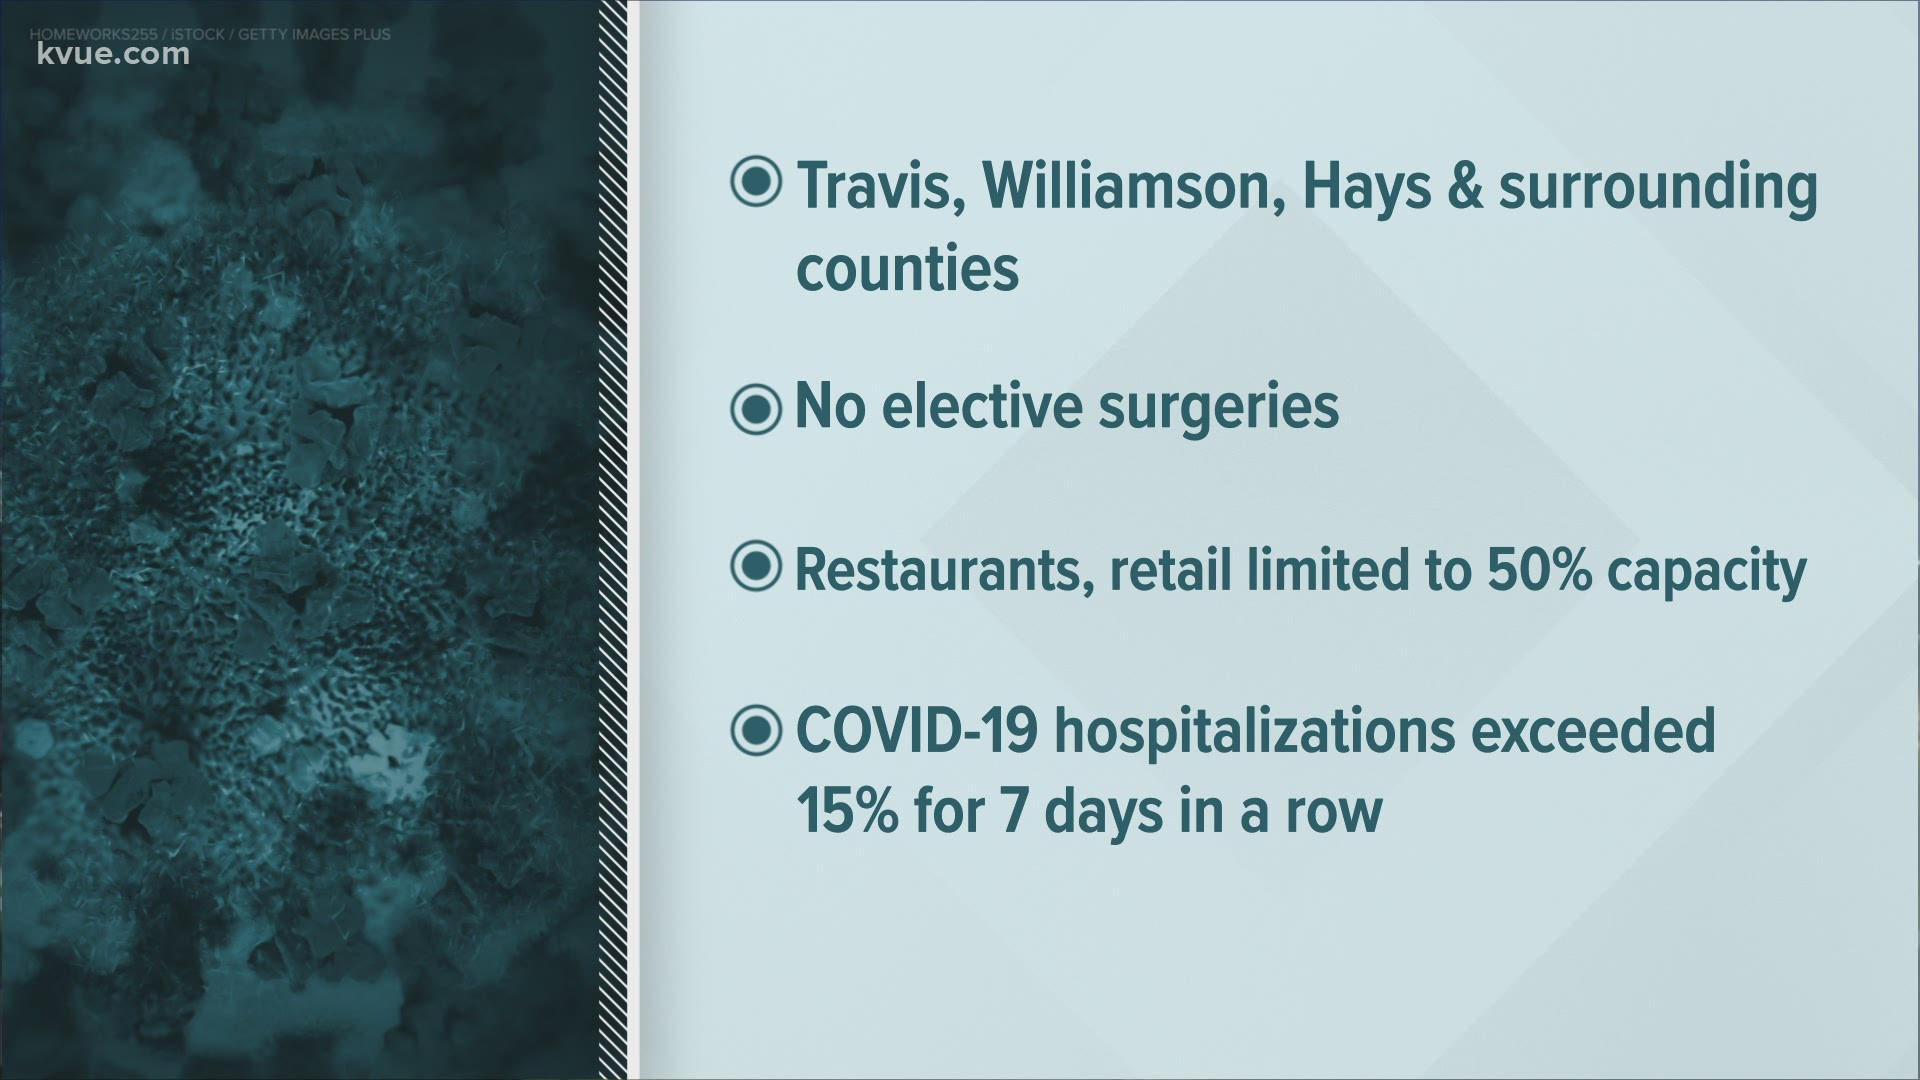 Sunday marked the seventh day in a row of COVID-19 patients exceeding 15% of hospital capacity.